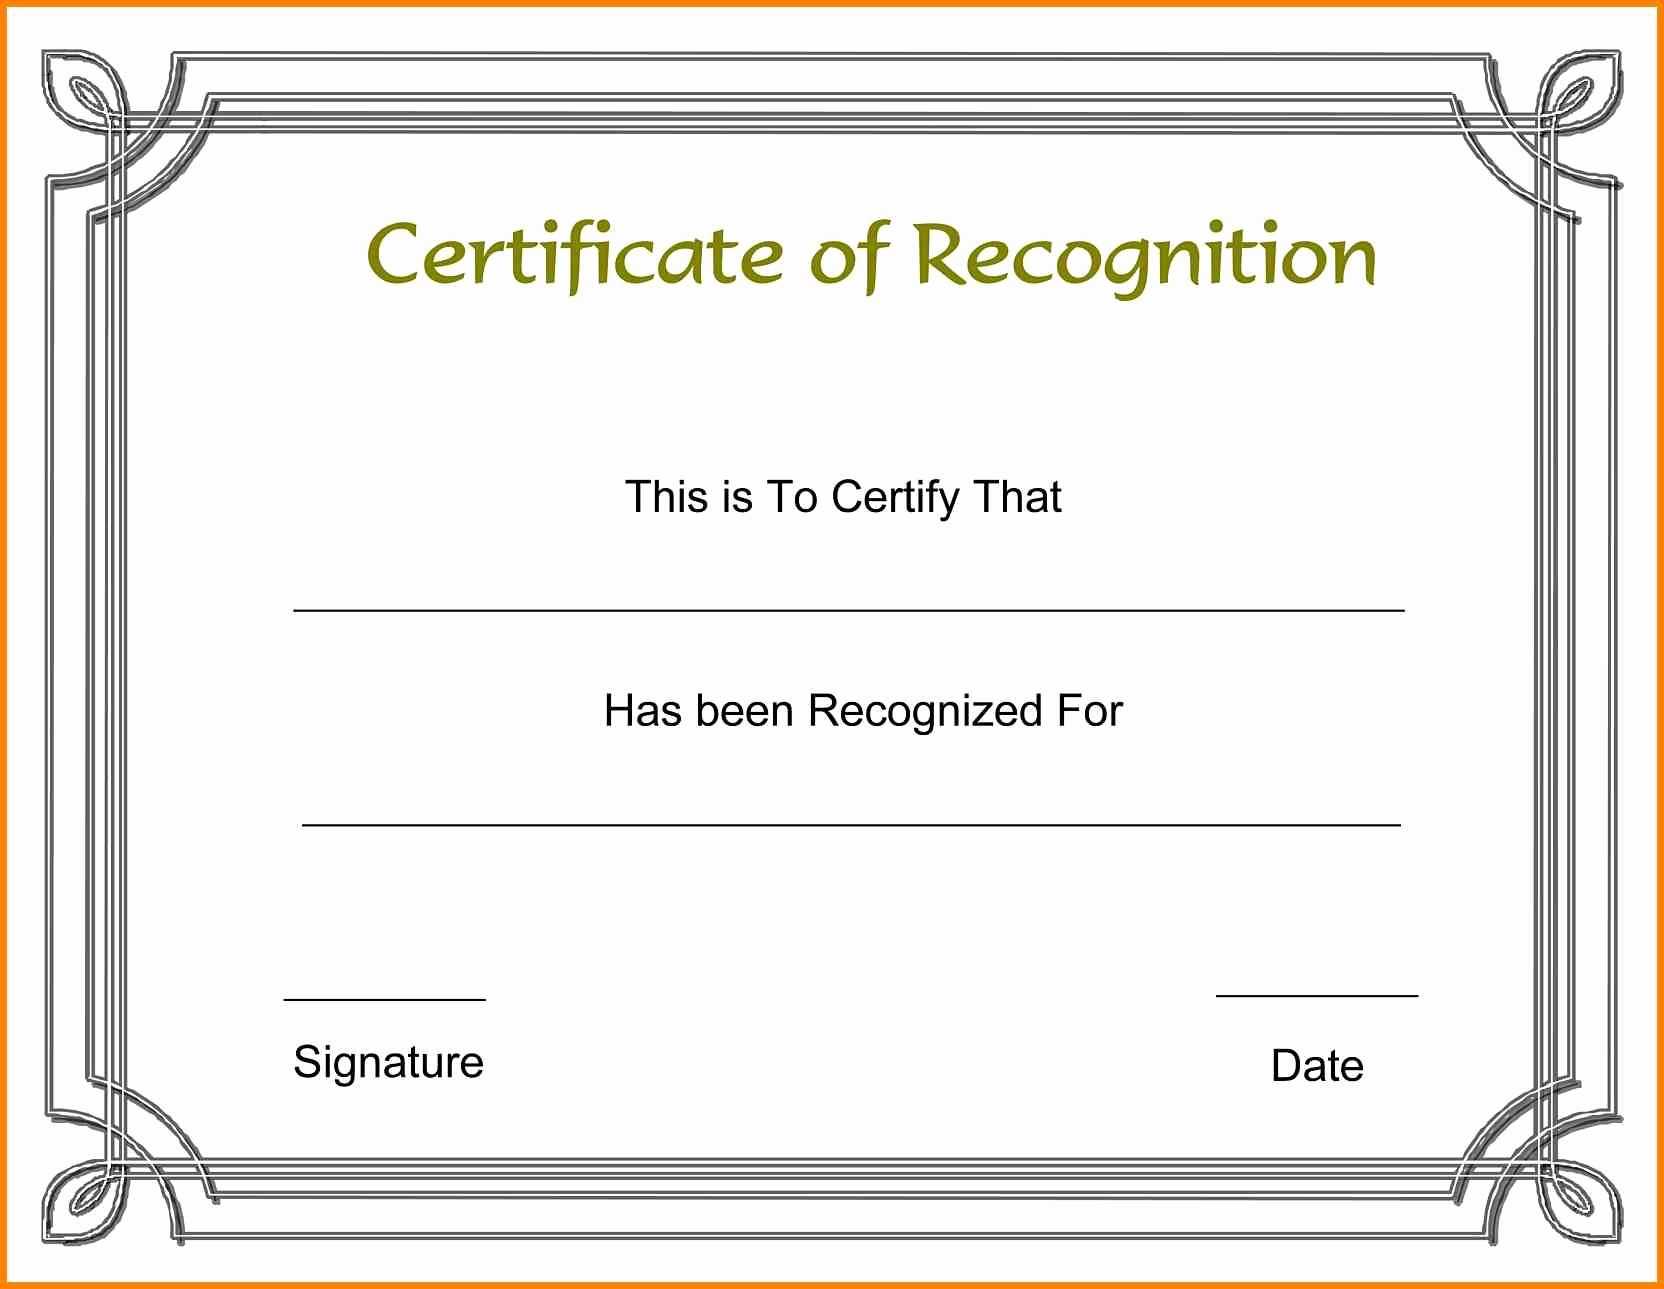 30 Scholarship Certificate Template Free | Pryncepality Pertaining To Build A Bear Birth Certificate Template